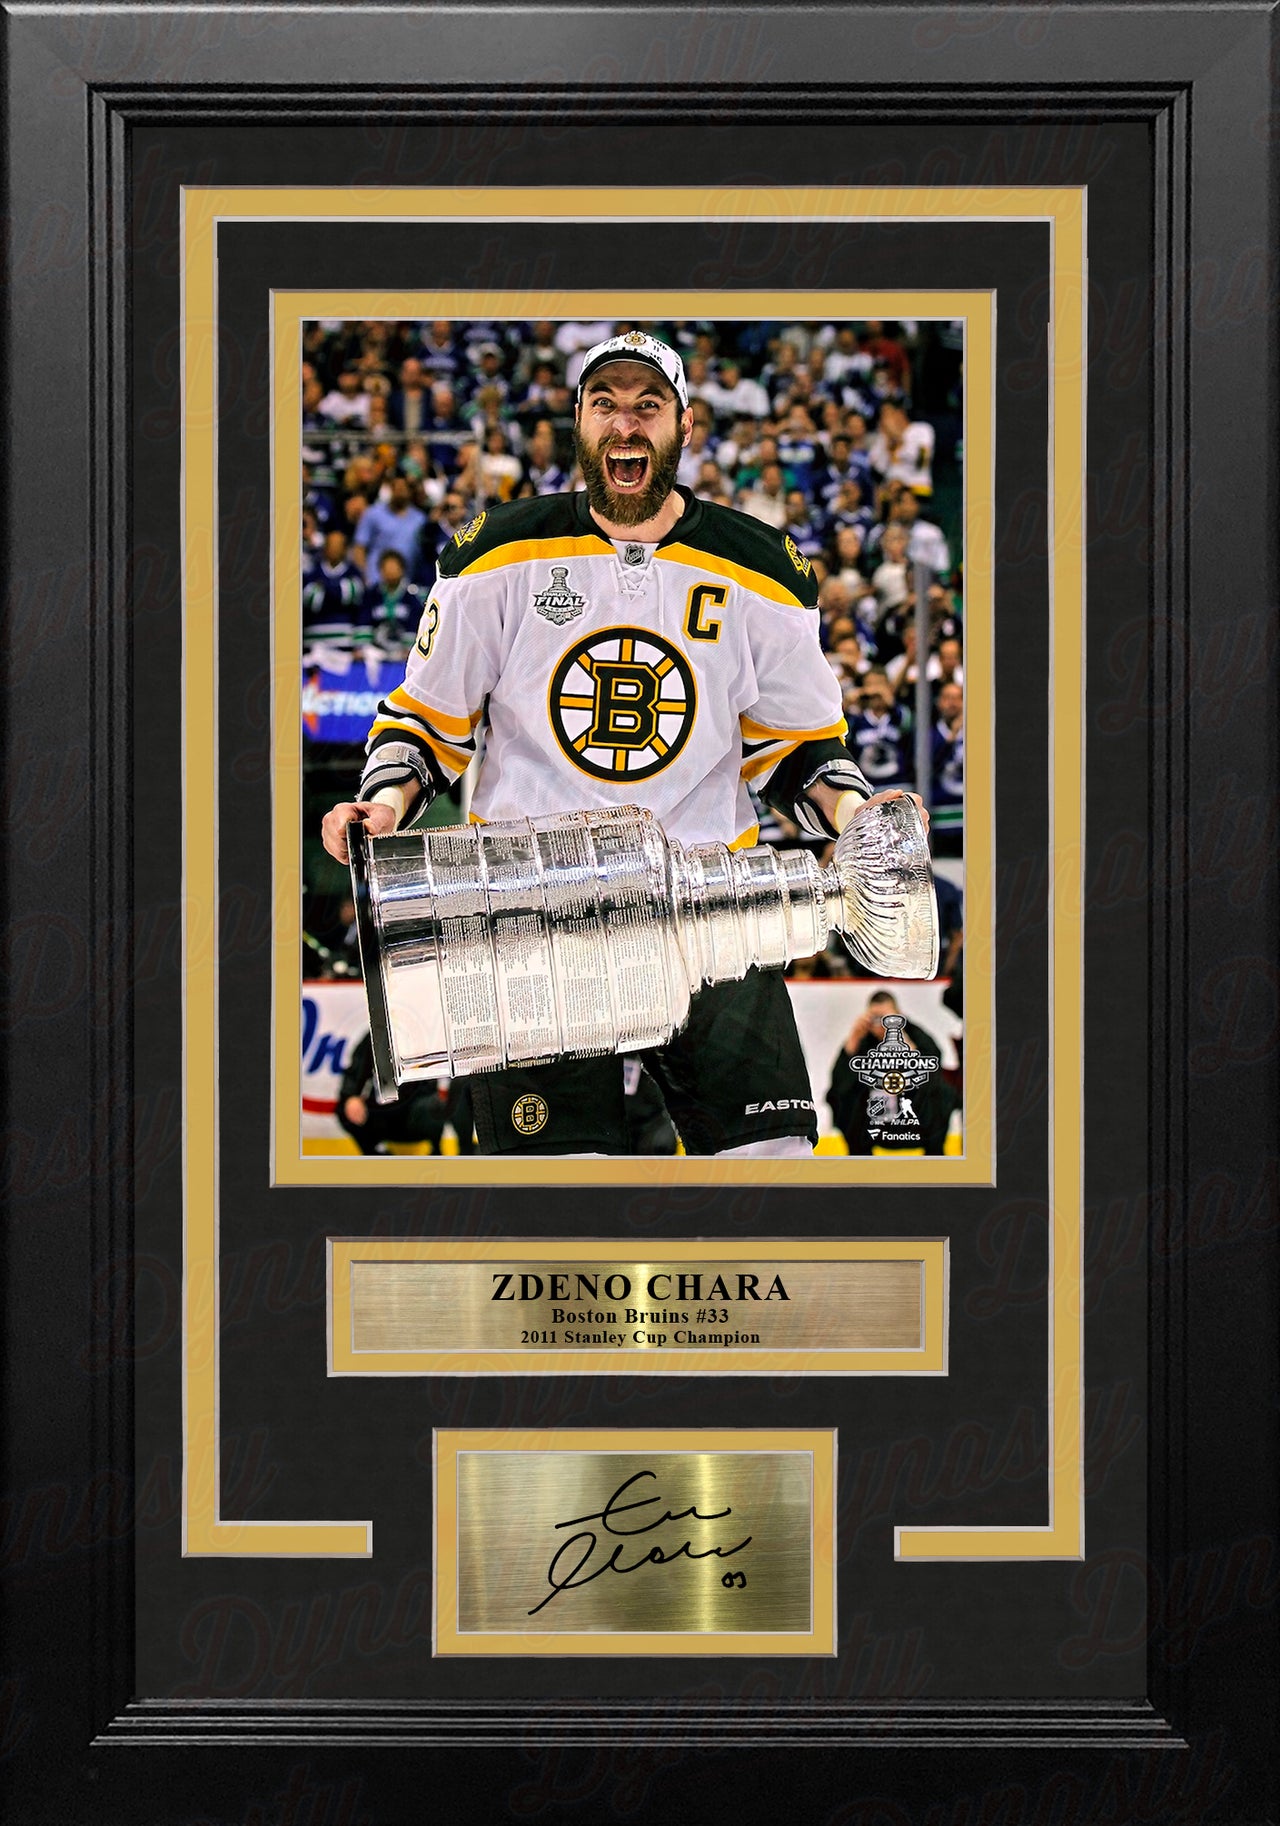 Zdeno Chara Hoists The Stanley Cup Boston Bruins 8x10 Framed Hockey Photo with Engraved Autograph